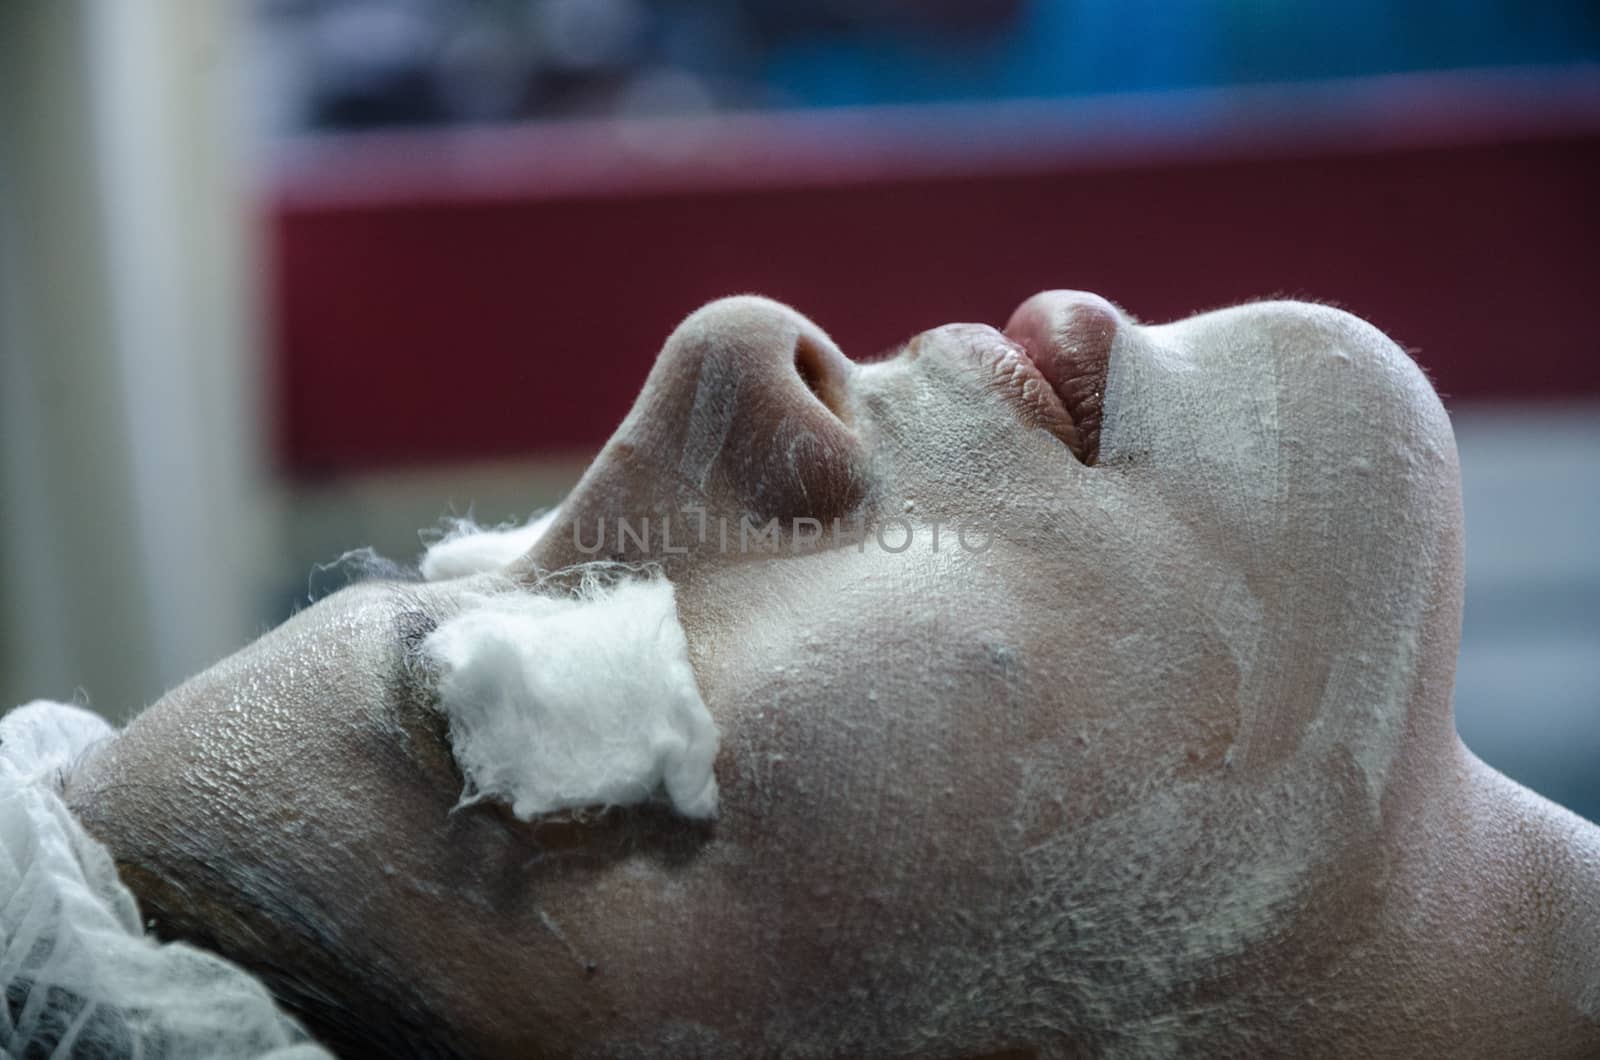 Cosmiatra performing facial cleansing on a patient